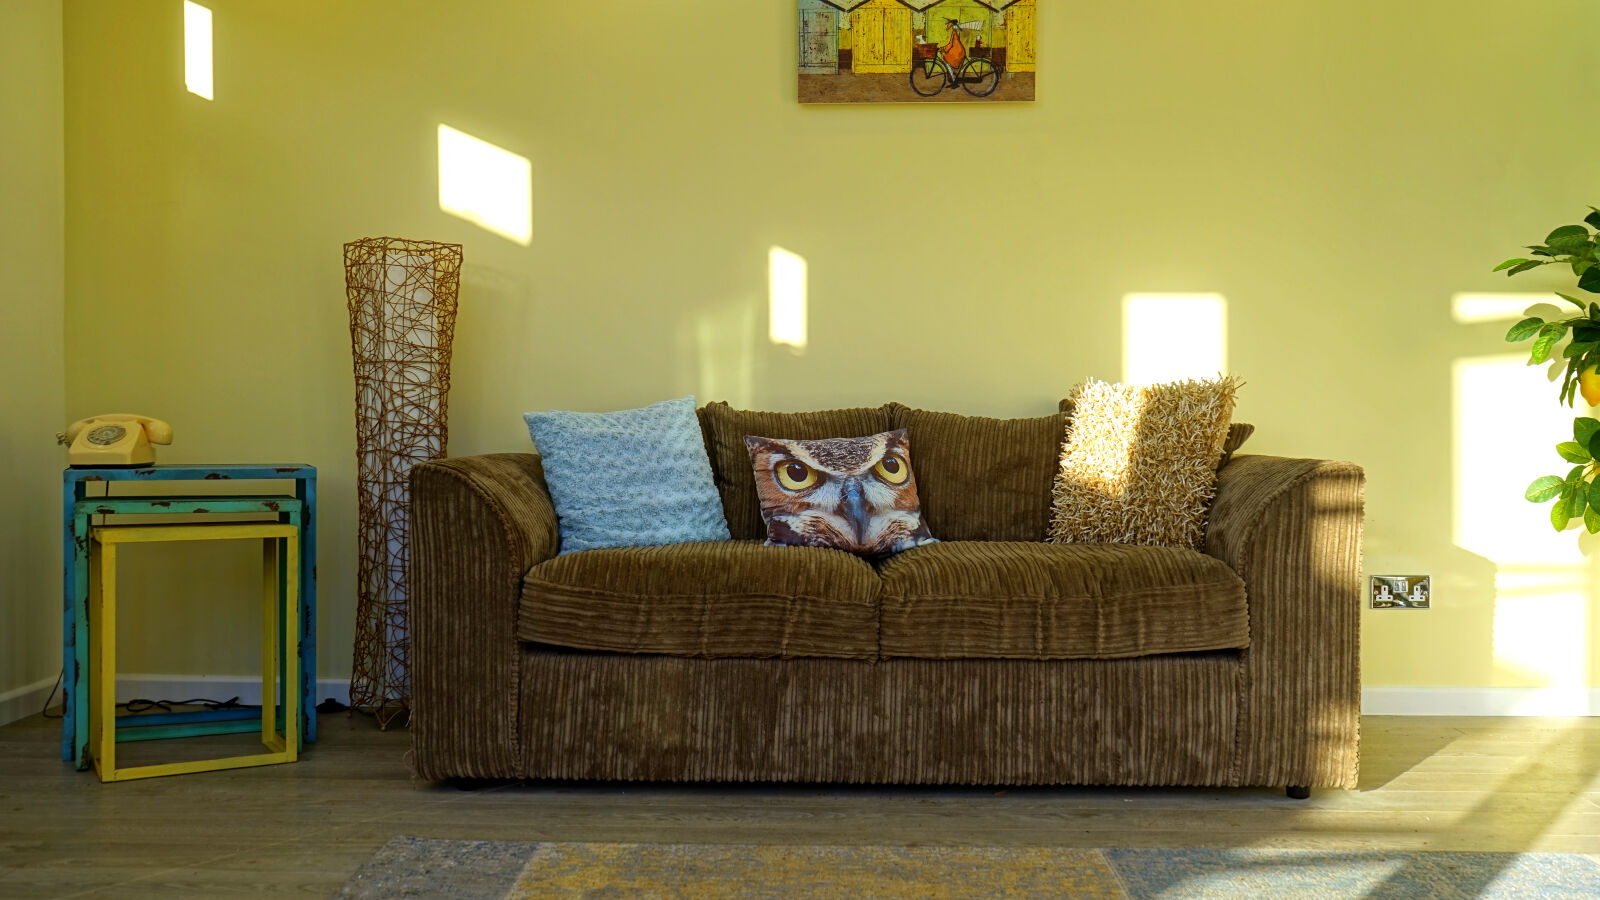 Sony a7 sample photo. Apartment, couch, cozy, decor photography